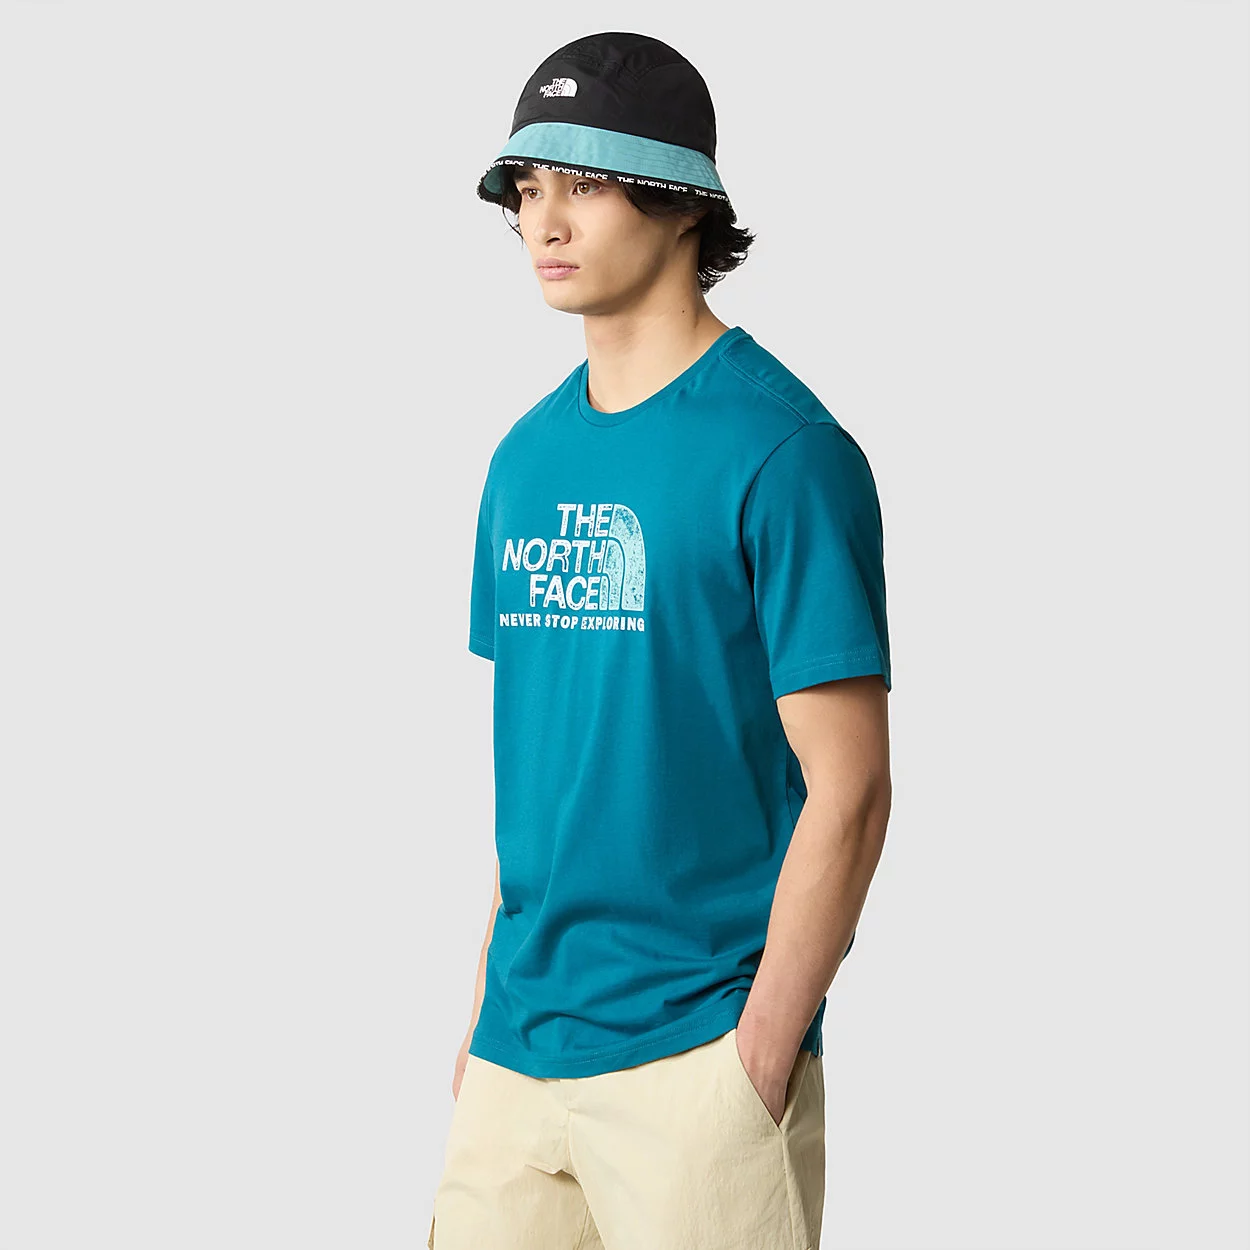 Pánské triko The North Face Men's T-shirt S/S Rust 2 Tee Blue Coral - Reef Waters NF0A4M68P6C (XS) (Blue)